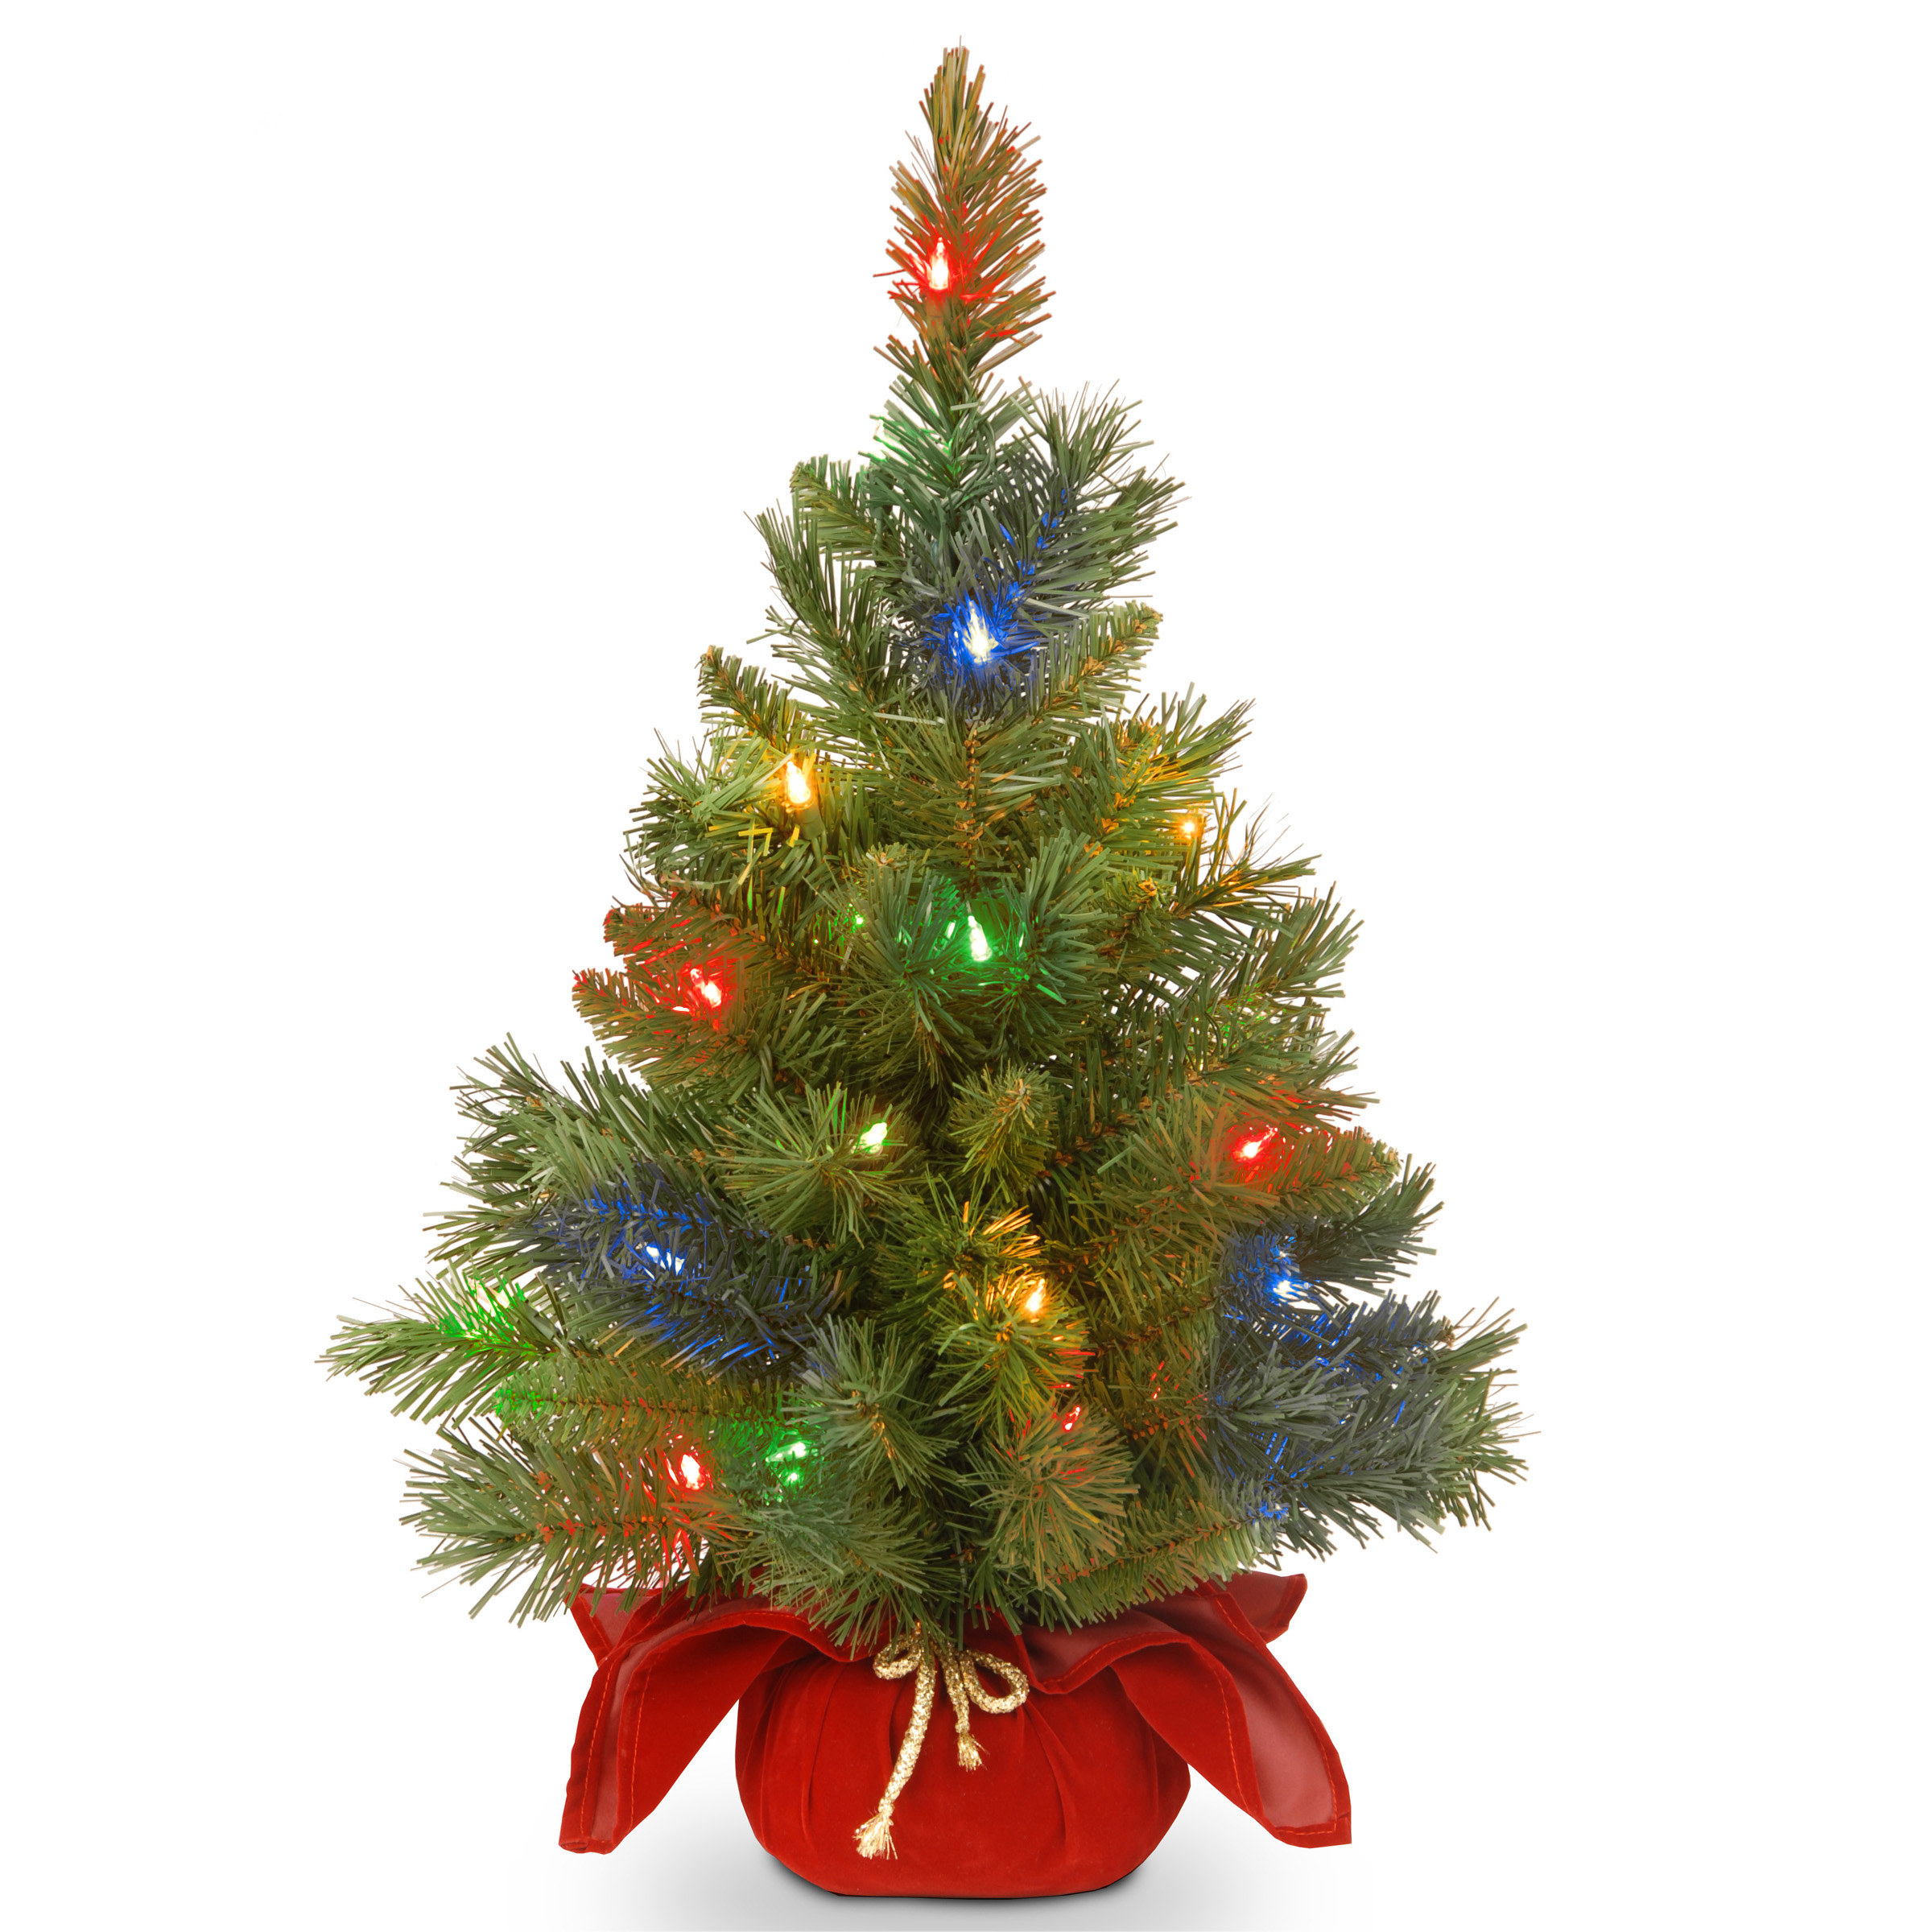 24" Majestic Fir Tree with Battery Operated Multicolor LED Lights - image 1 of 5